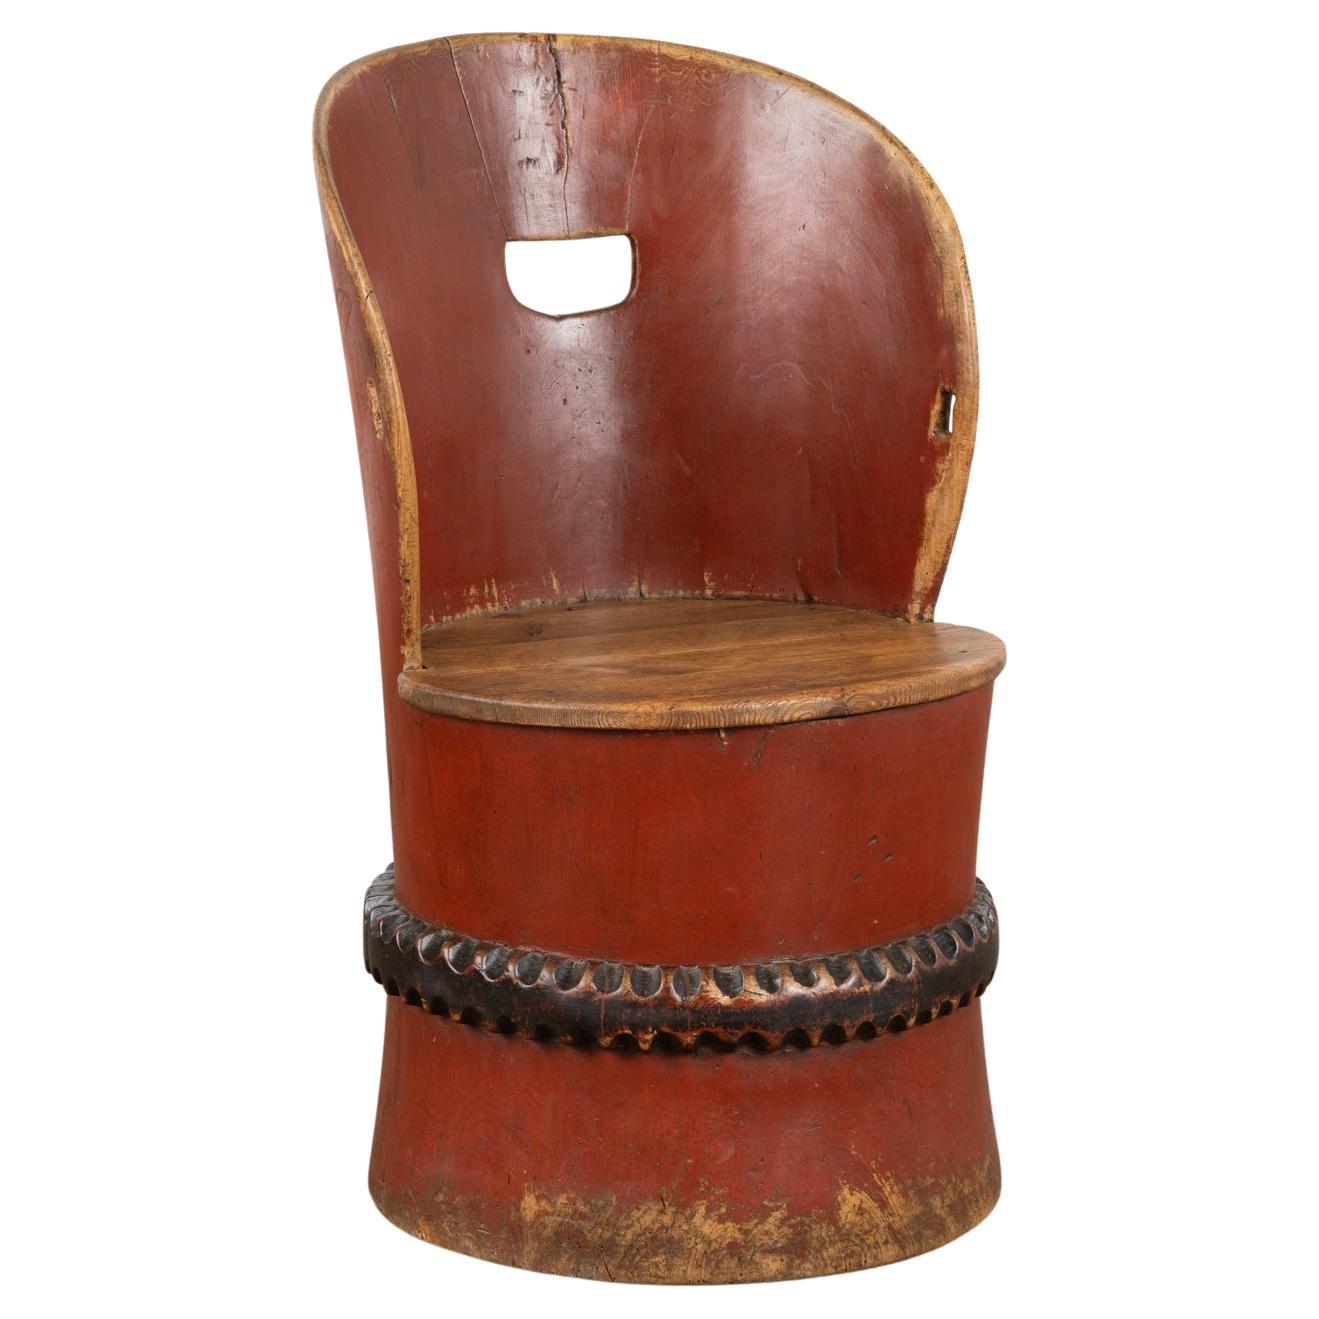 Original Red Painted Kubbestol Log Chair, Sweden circa 1860-80 For Sale